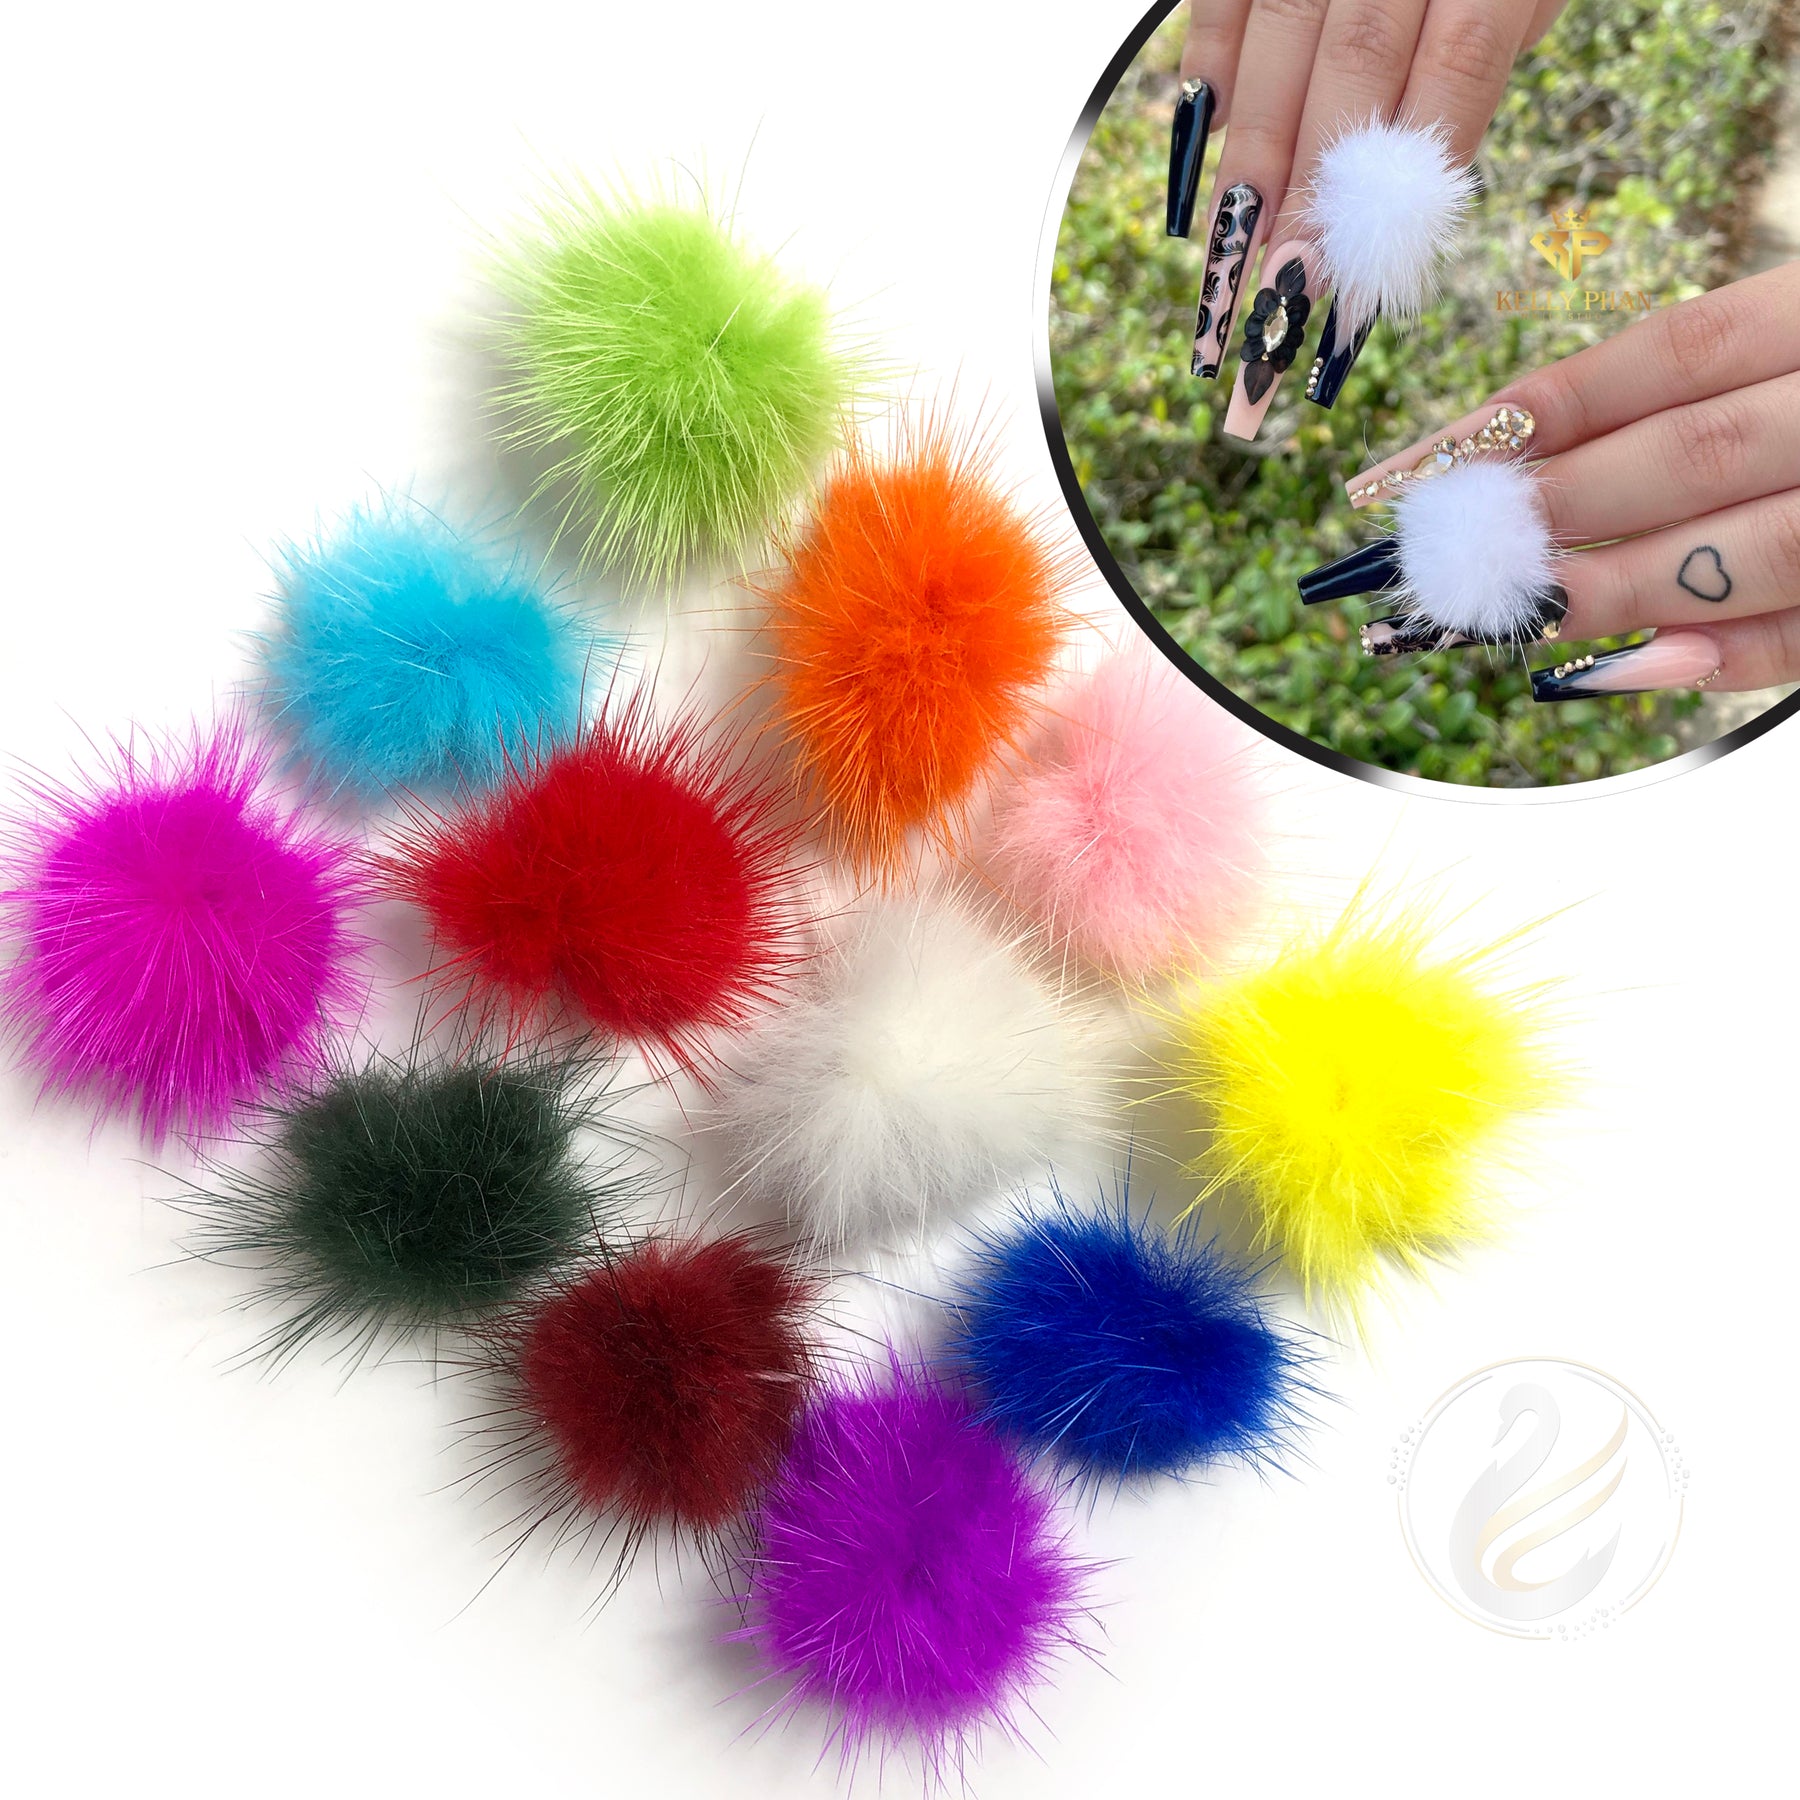 Magnetic Fur Pom Pom Ball For DIY Nail Art Detachable Plush Manicure  Accessory With Fluffy Design From Emmaseasea, $9.52 | DHgate.Com